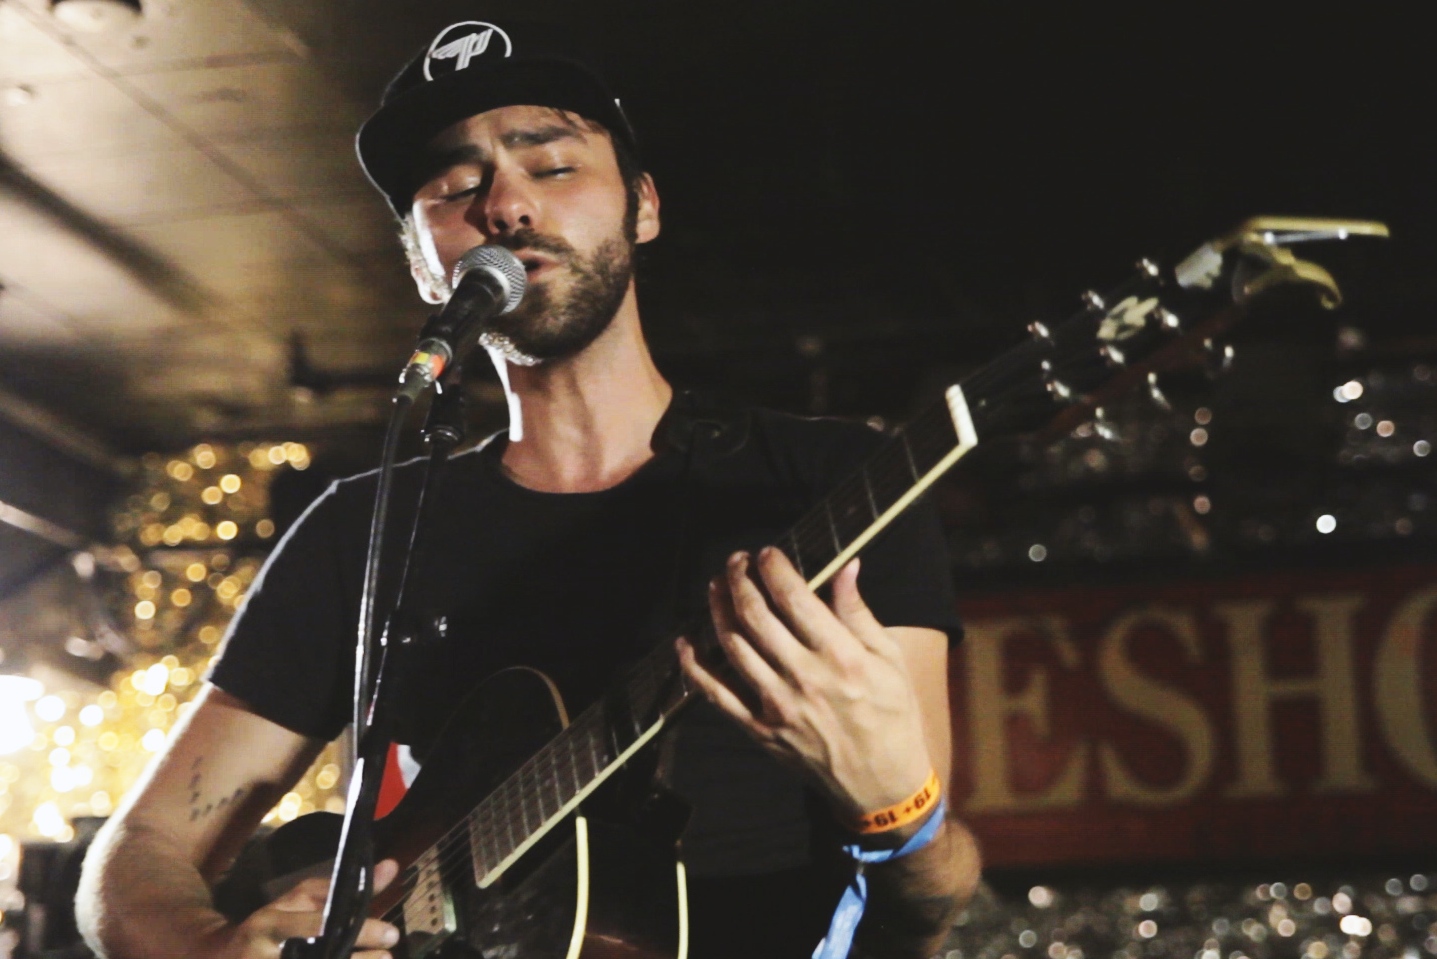 Shakey Graves 'Built to Roam' on Exclaim! TV